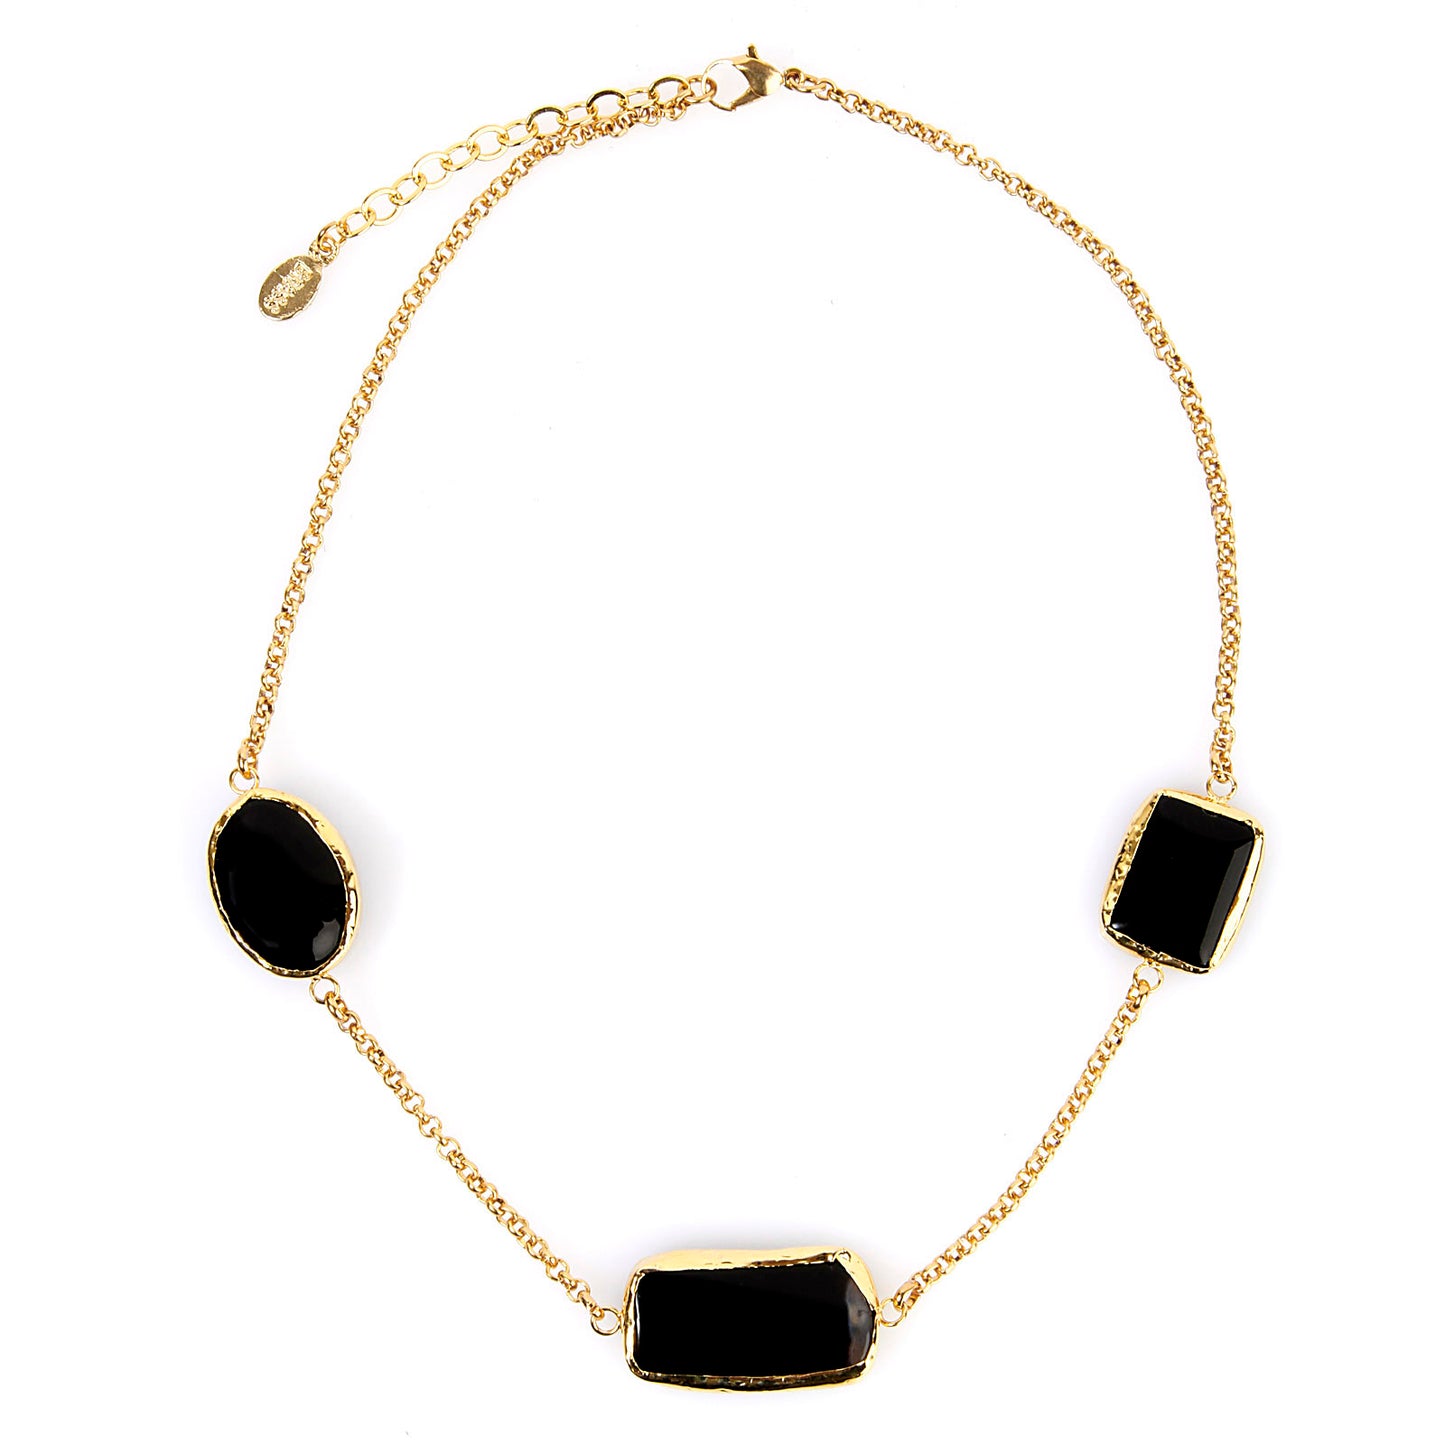 ELYA Gold Tone Black Onyx Cable Chain Necklace (18 mm) - 18"